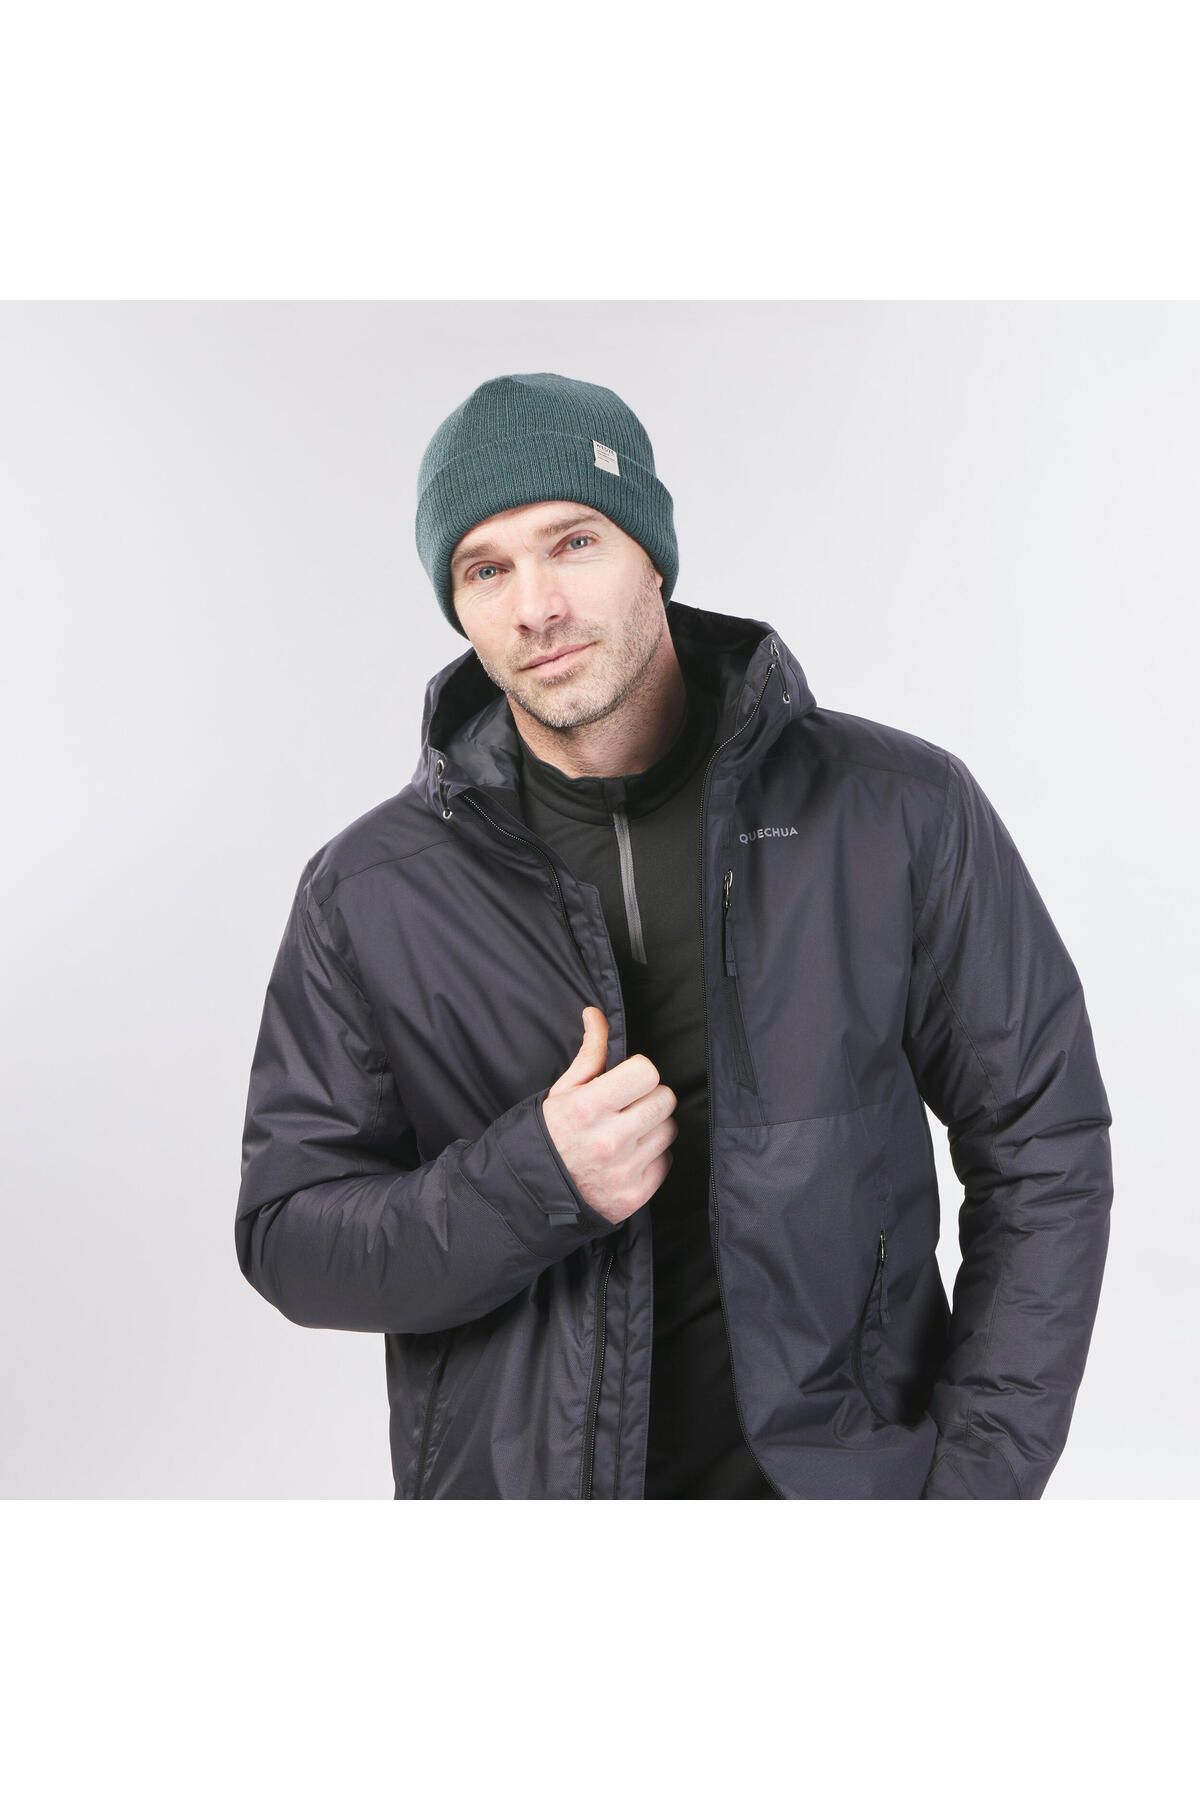 Jackets & Overcoats | Black Fitted Quechua Jacket | Freeup